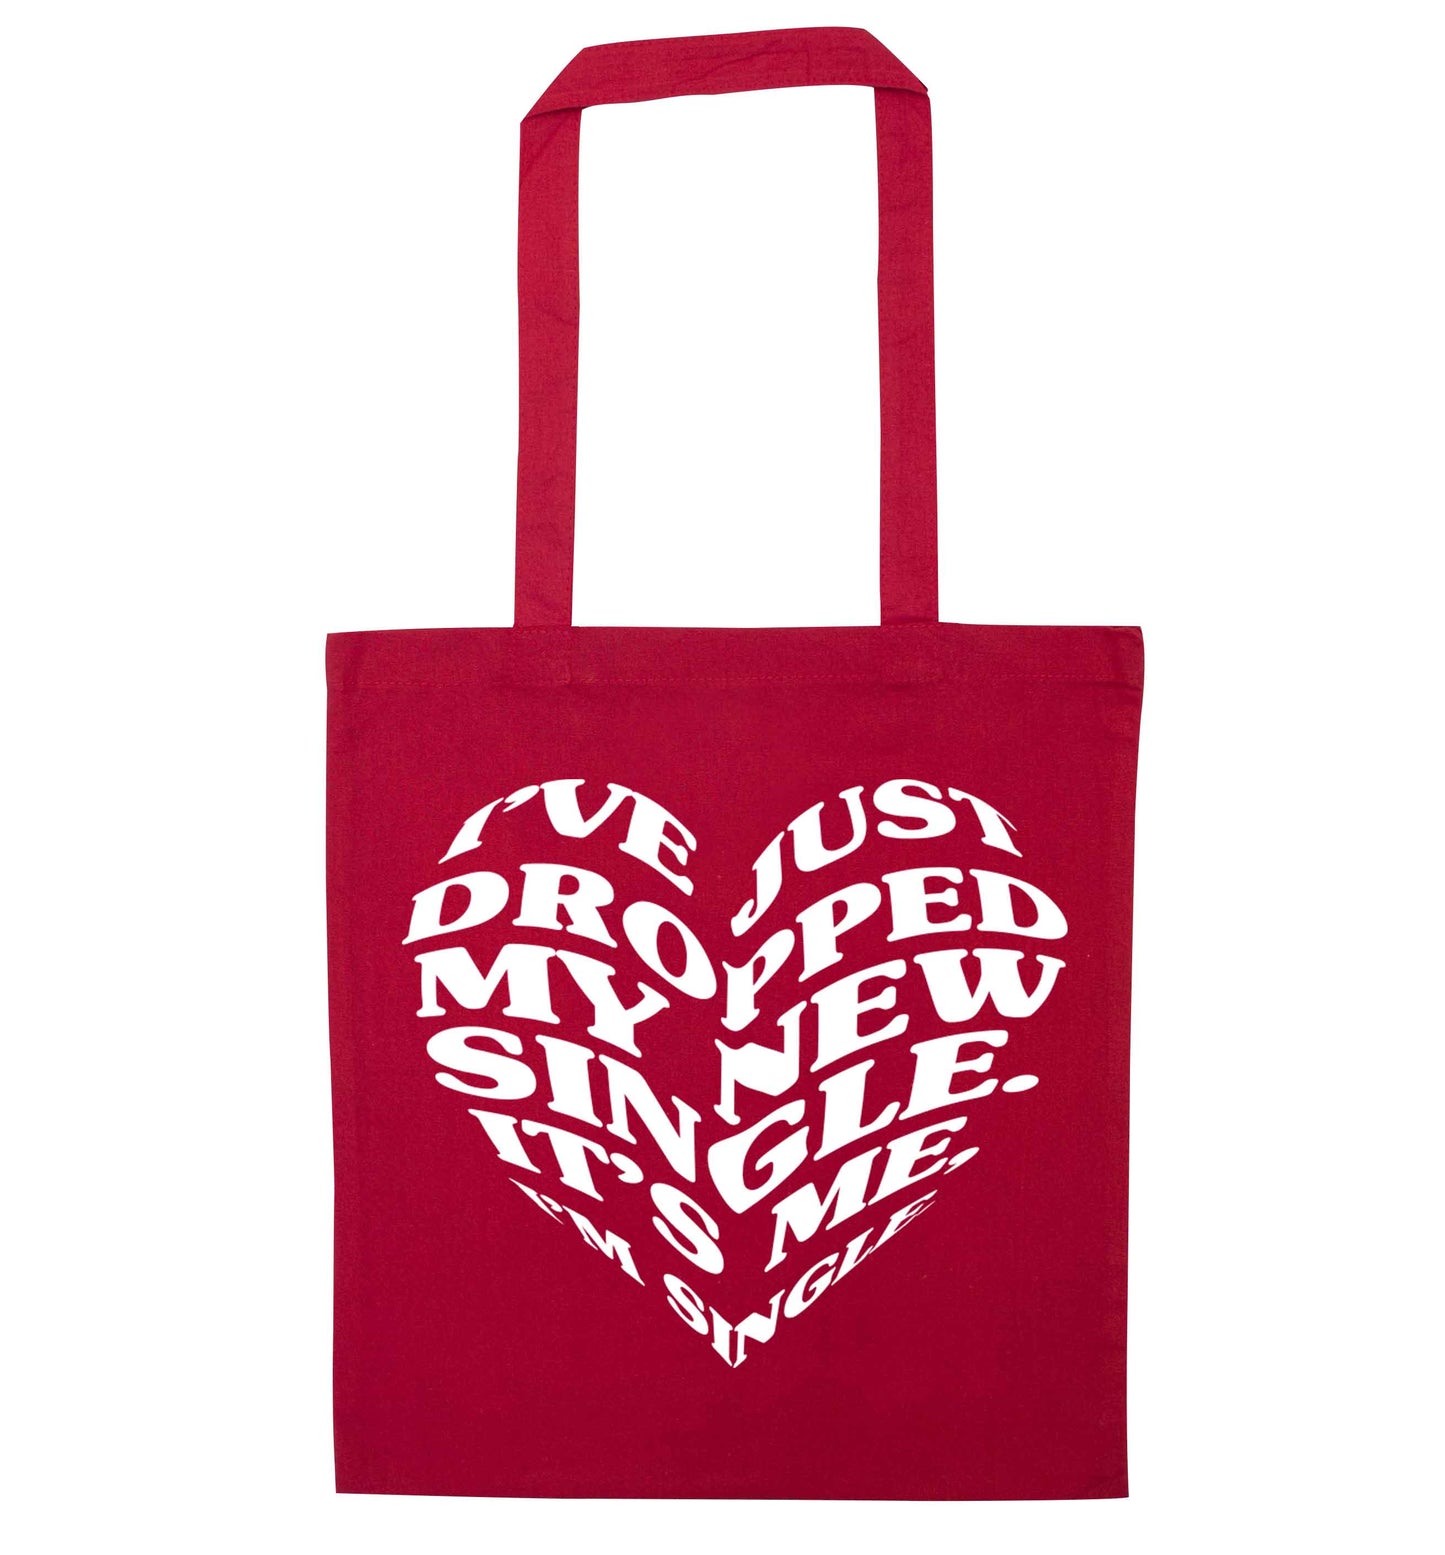 I've just dropped my new single it's me I'm single red tote bag